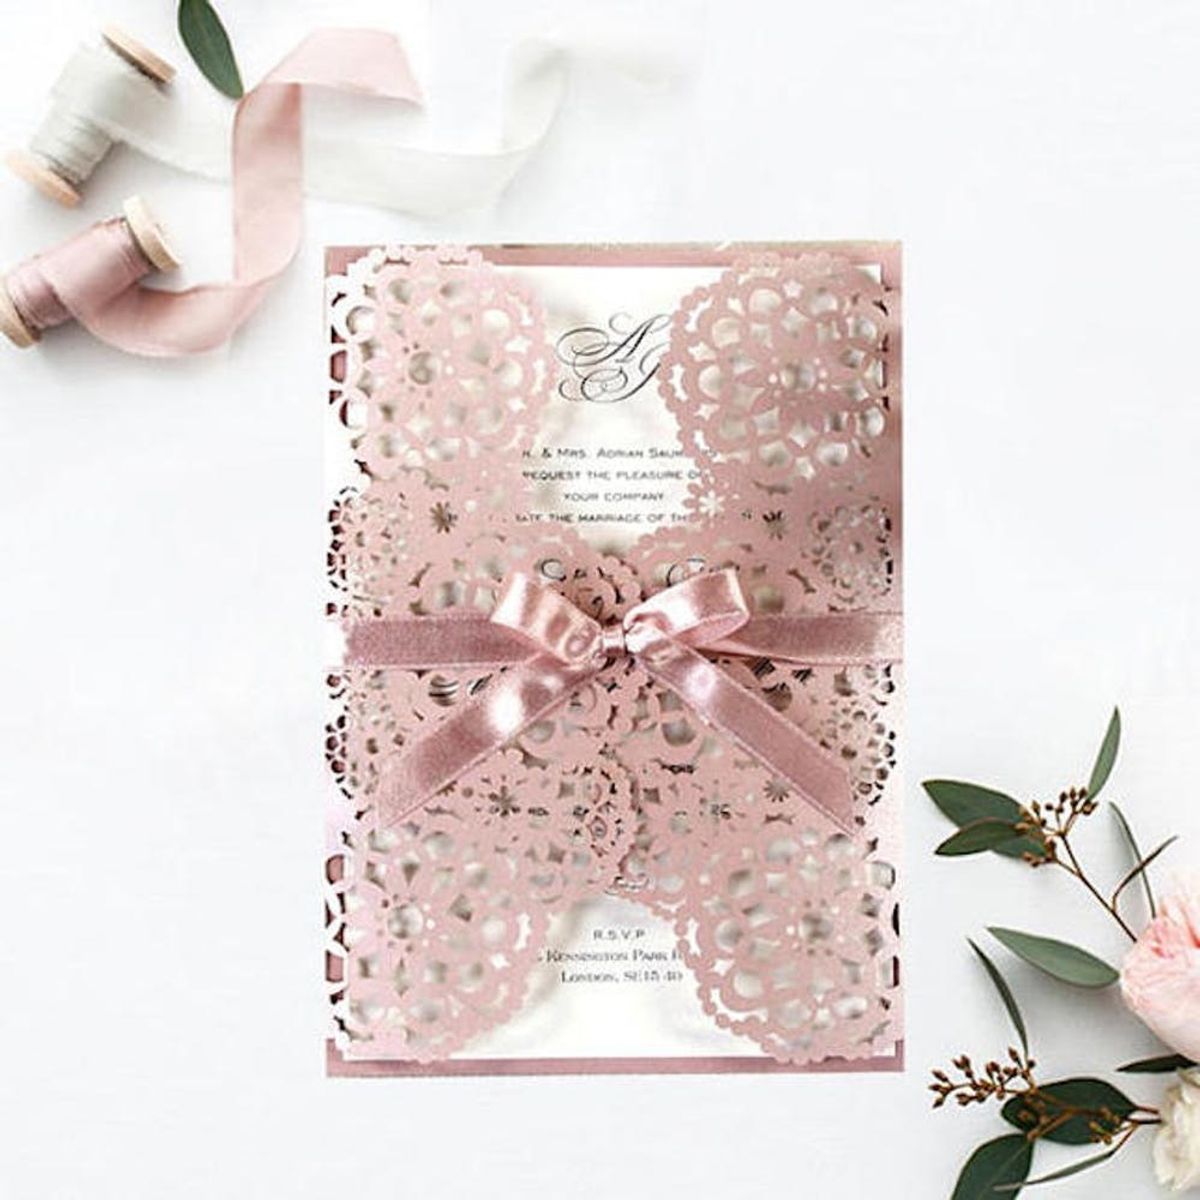 20 Embossed Wedding Invitations That Will Give You All the Feels (Literally!)